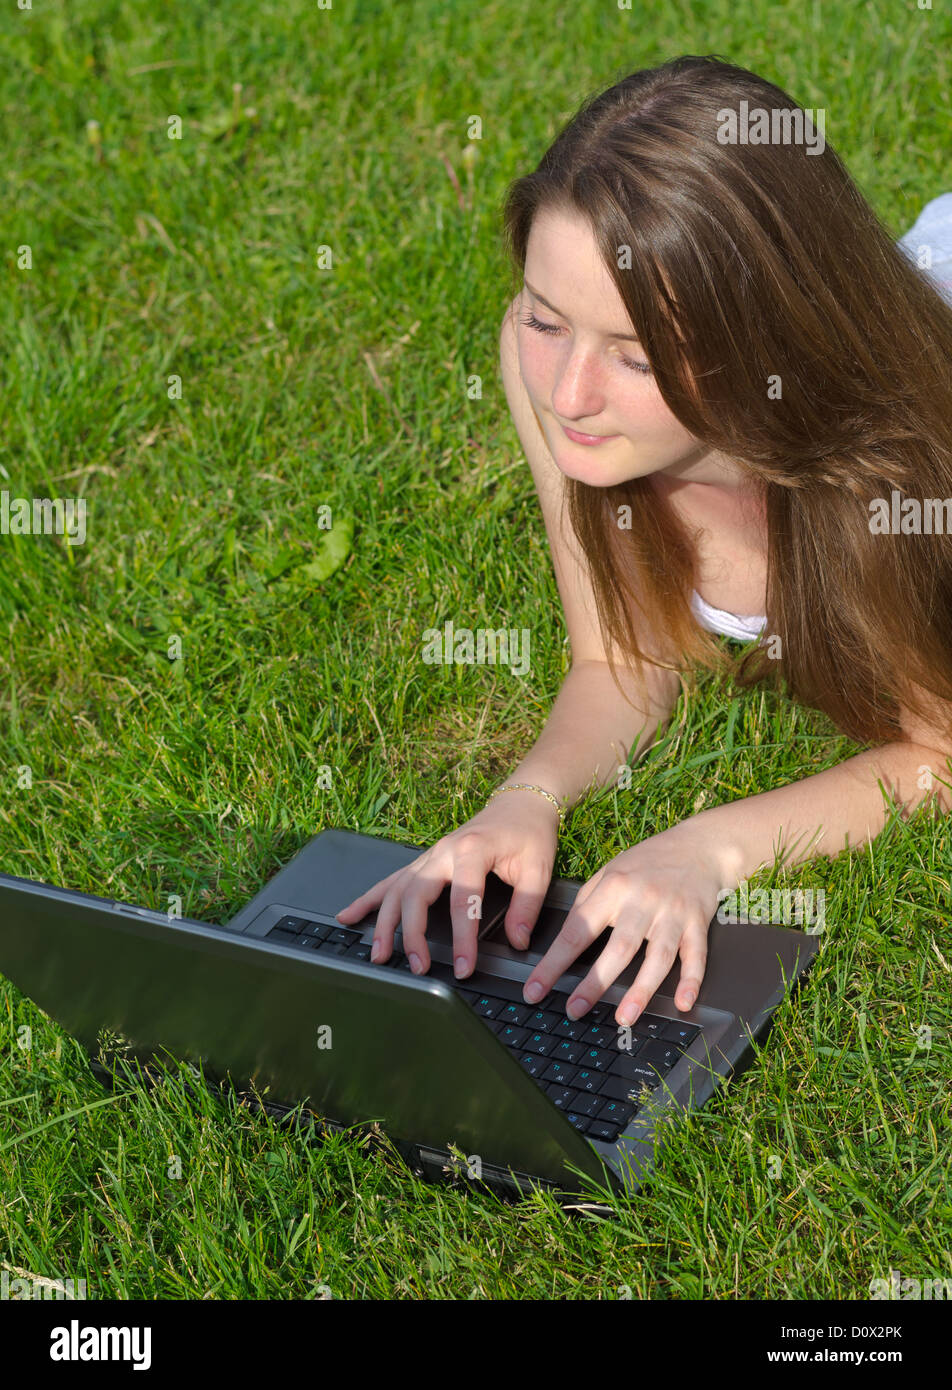 High angle view of an attractive young woman using a laptop while lying on her stomach in green grass Stock Photo